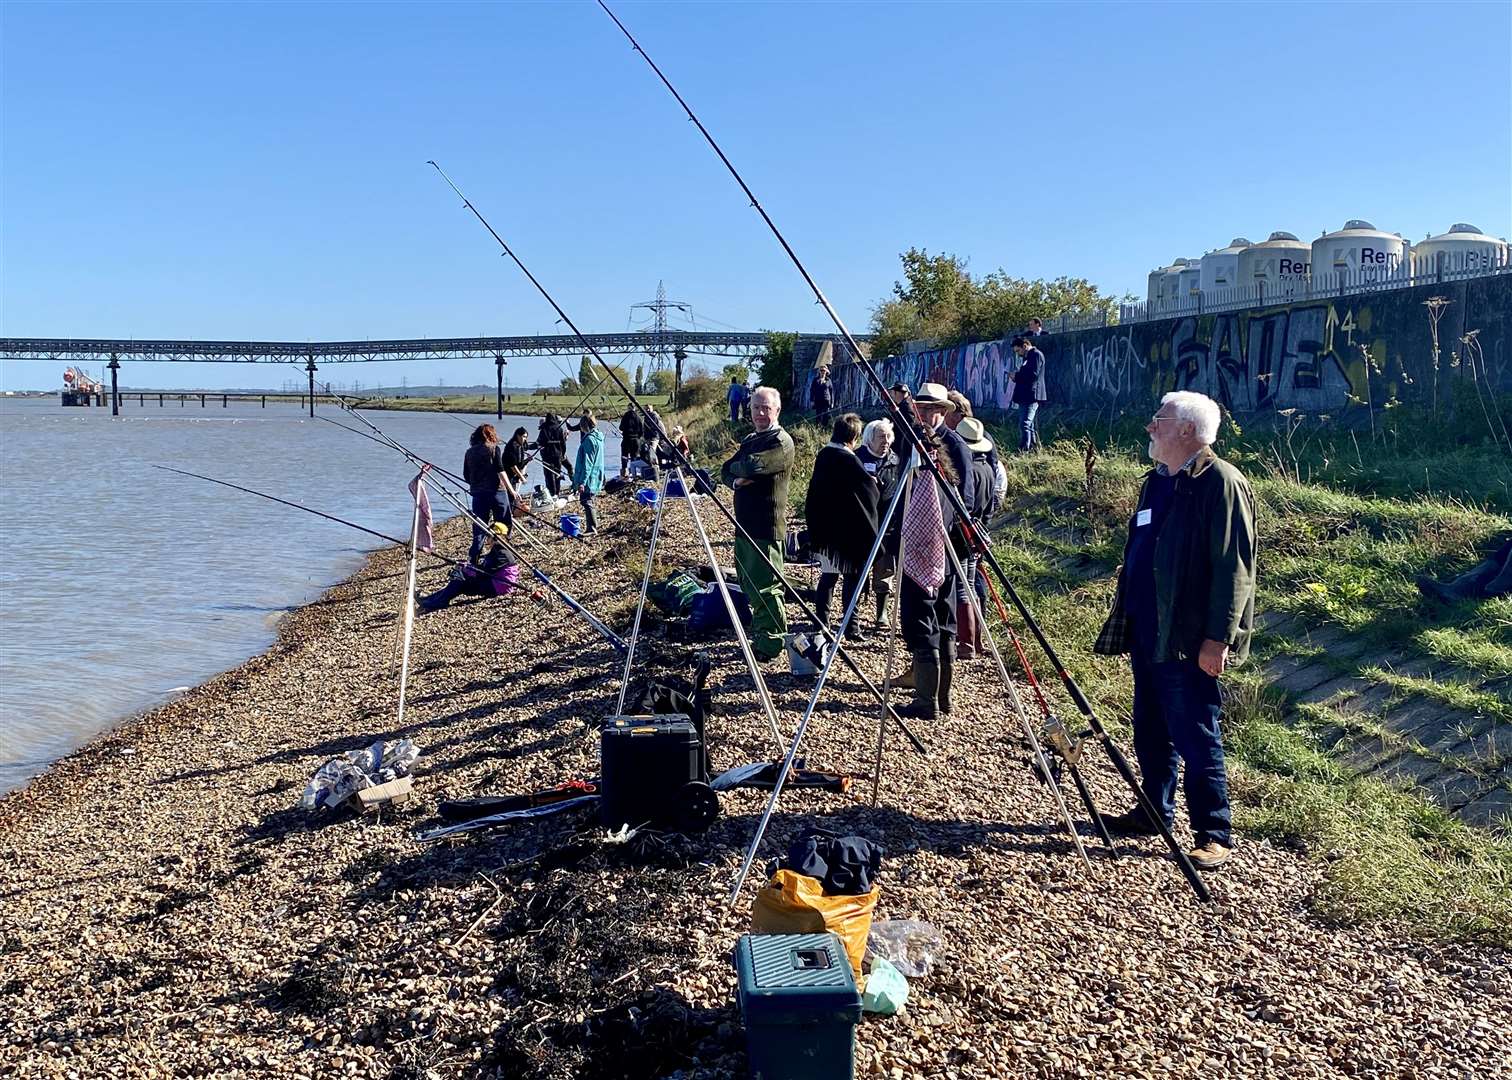 The 50th City of London Thames Fishery Research Experiment, held this year, saw the highest number of fish caught since 2005 and the most species found since 2008. Picture: City of London